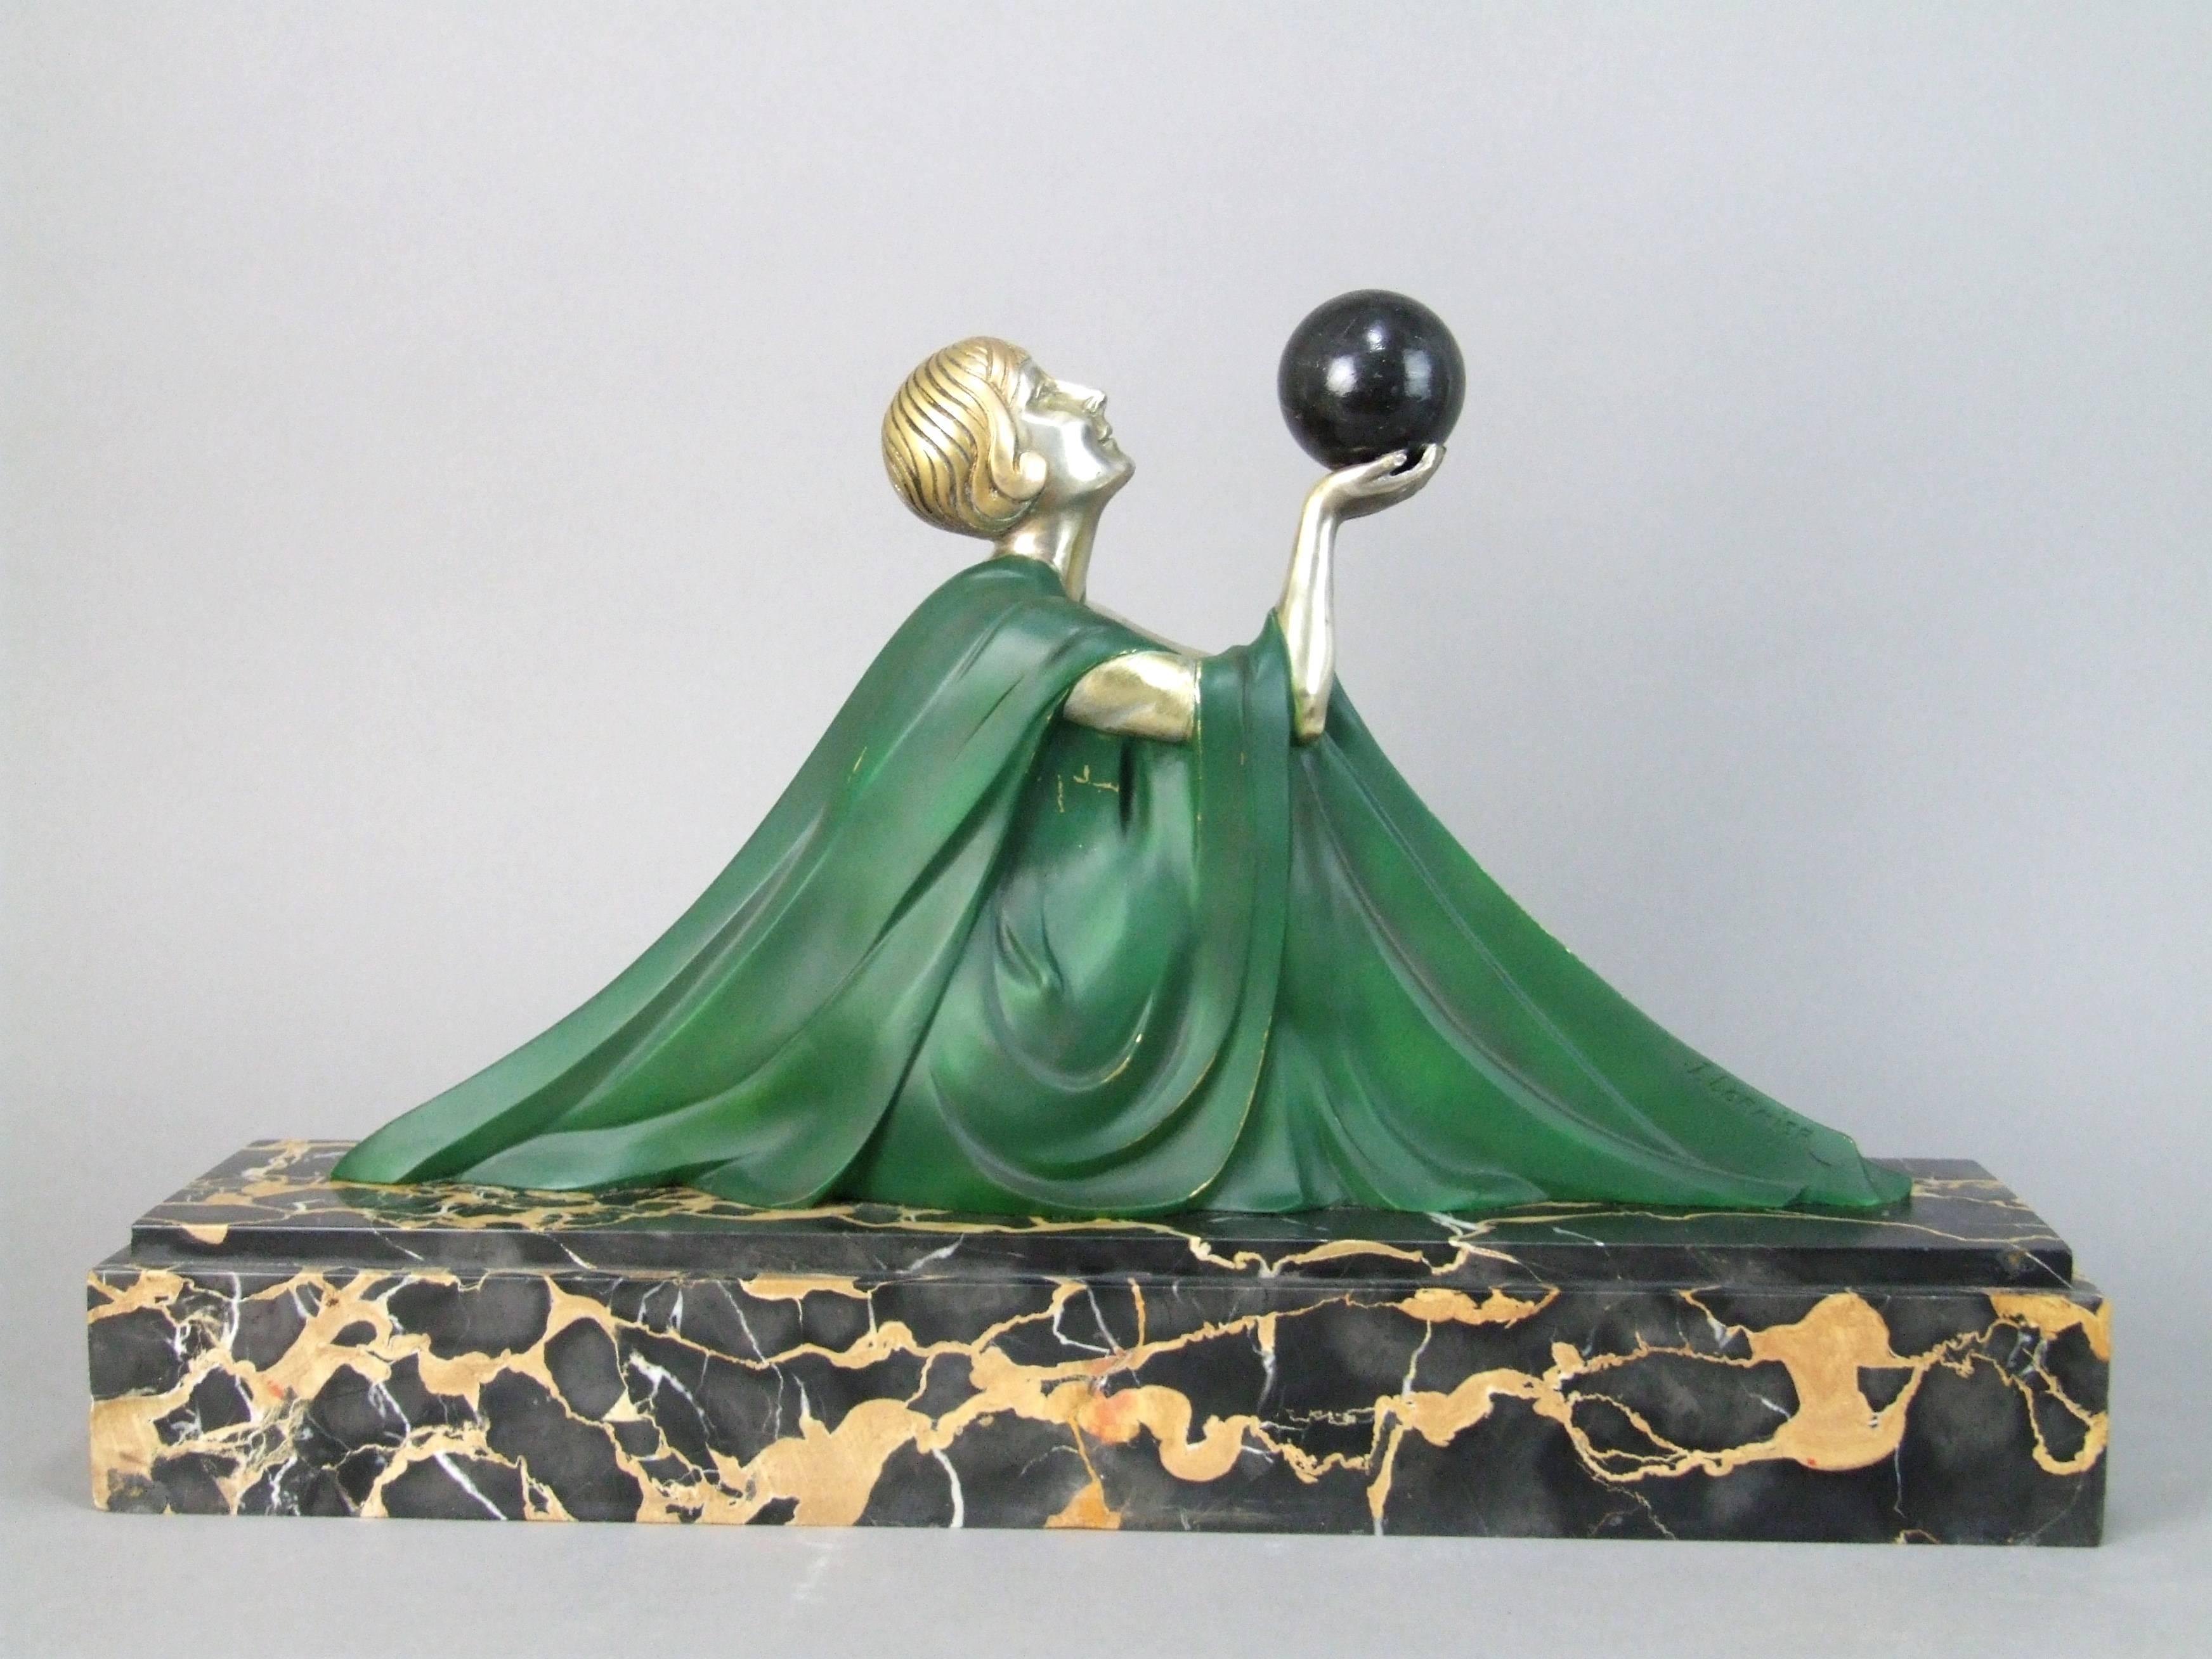 French Art Deco silvered bronze statue - Reverie by Lormier. She is mounted on a portorro marble base that measures 18.5 inches long by 5 inches deep by 12 inches high (47cm x 12.5cm x 30cm). Condition is very good with just a few tiny edge nibbles